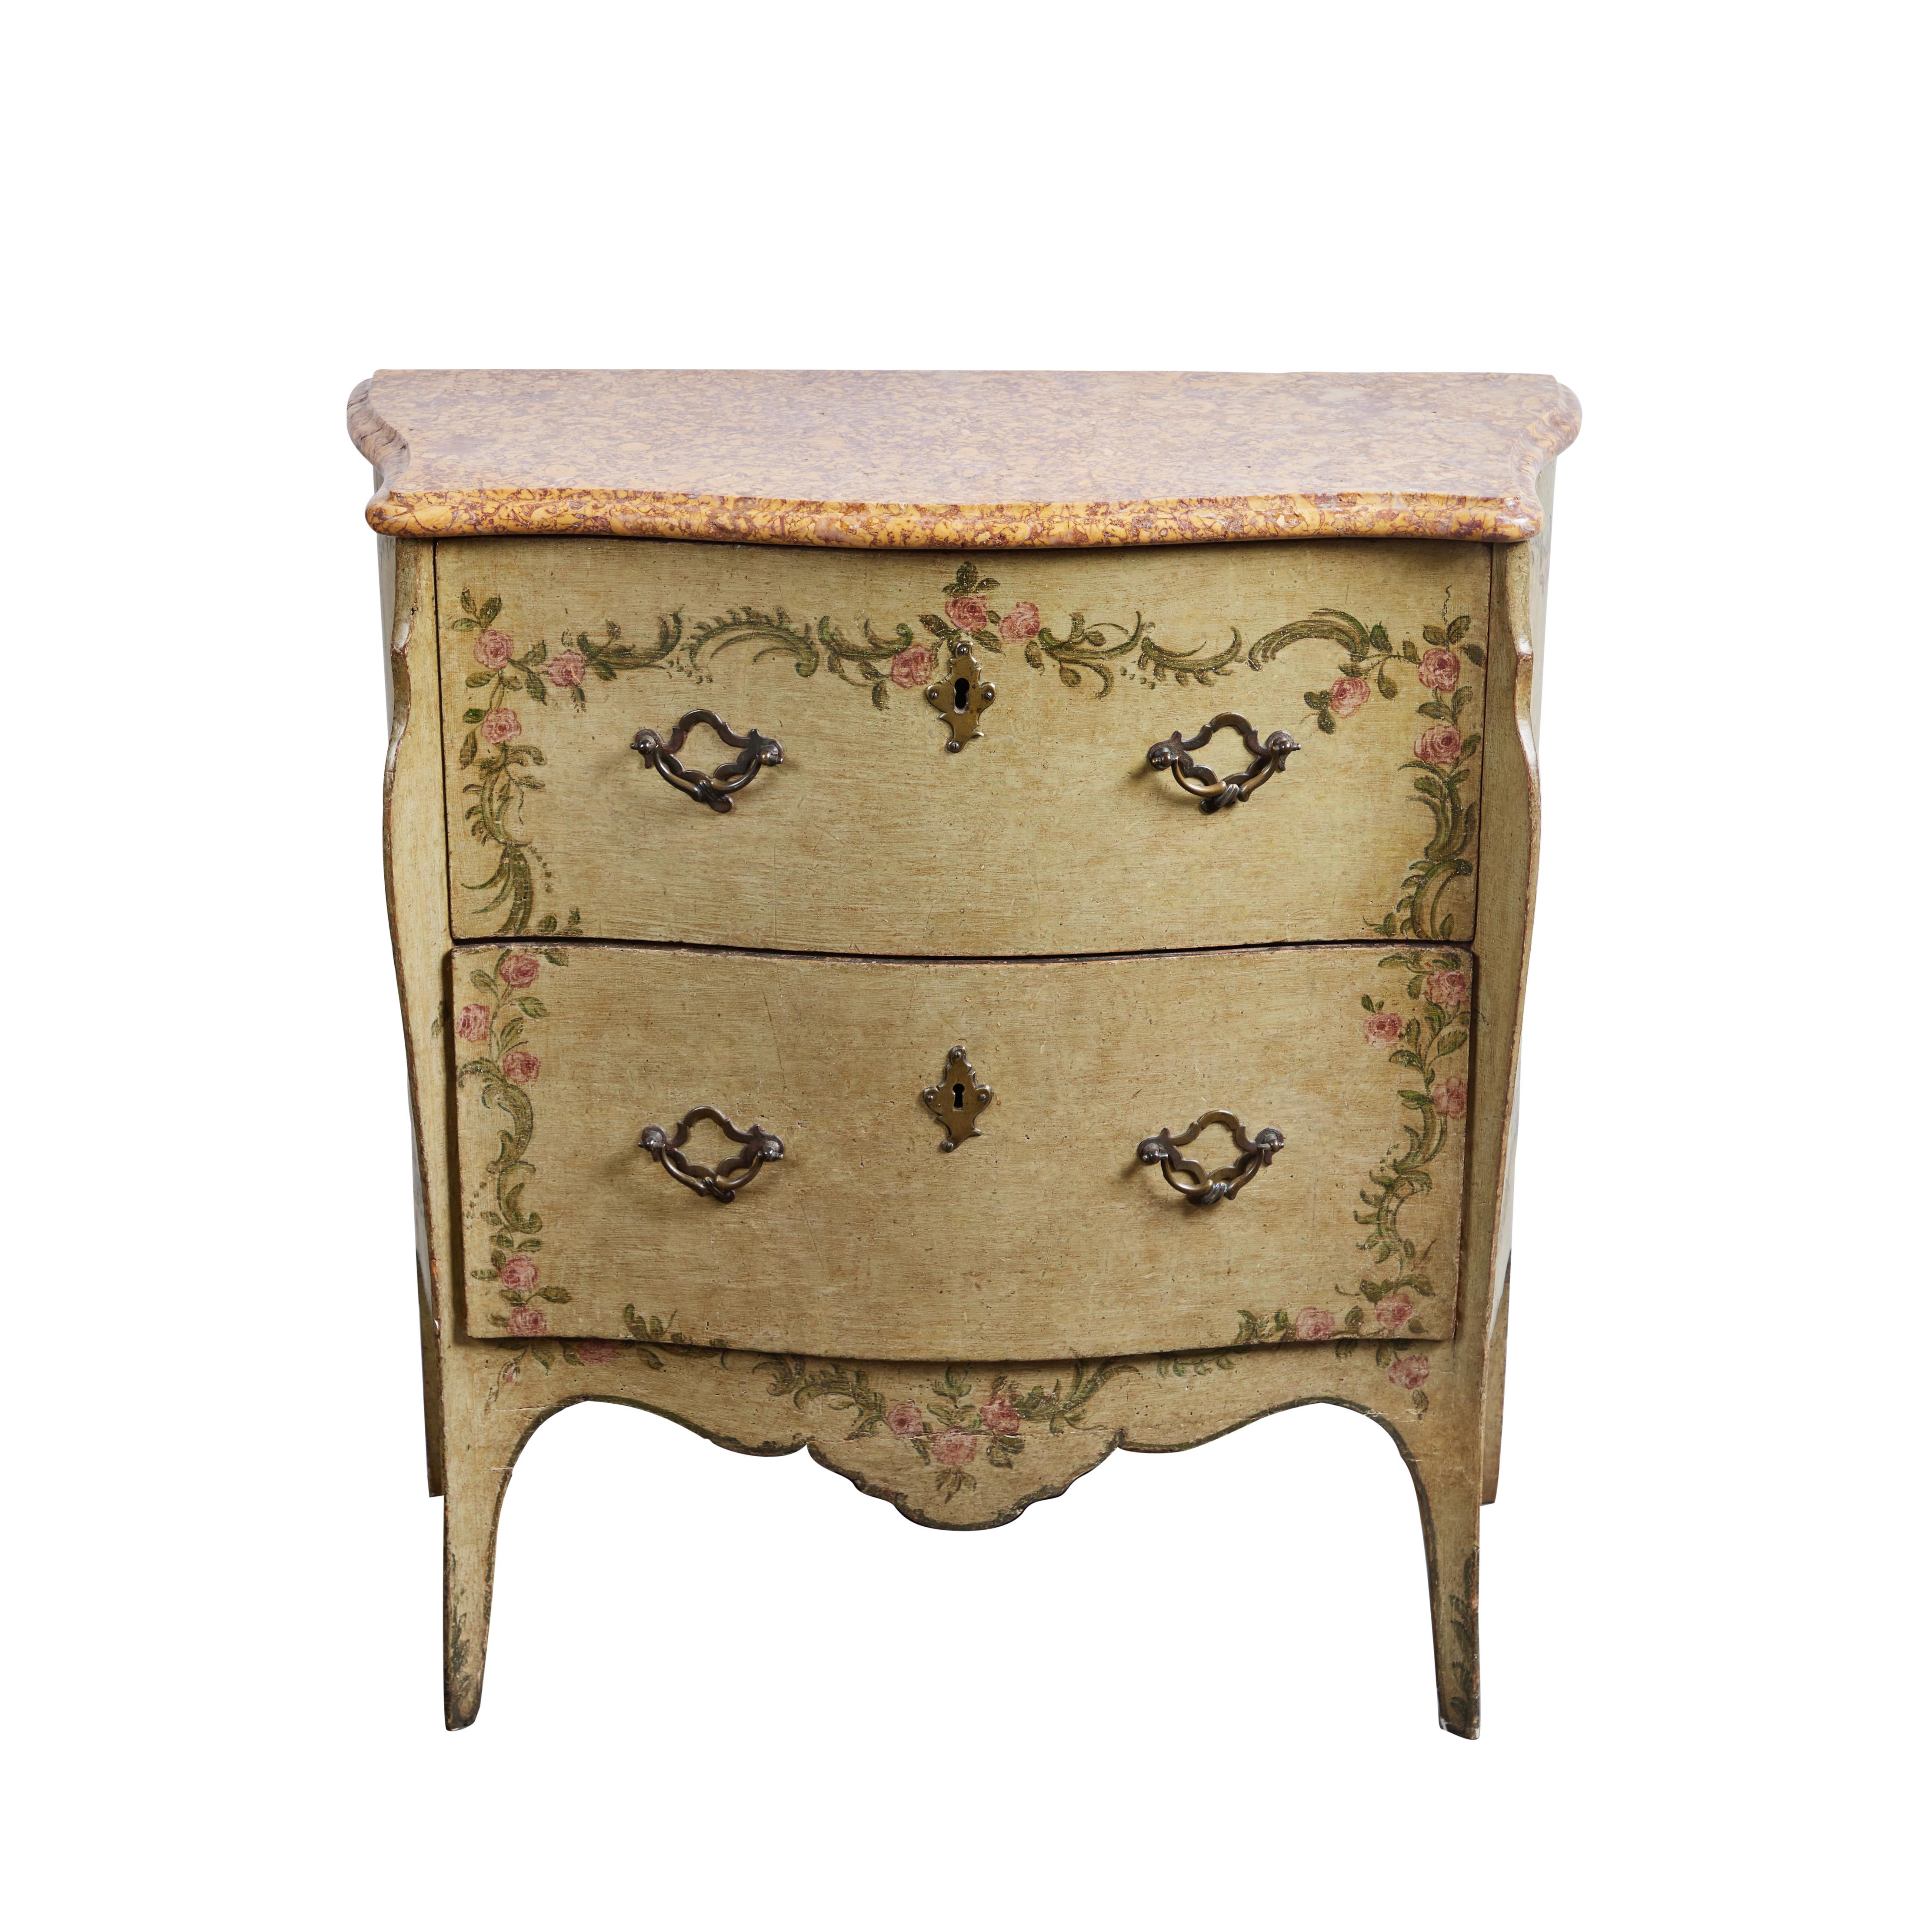 A charming, painted 2 drawer commode with original bronze hardware and Brocatello di Spagna marble top. Flowers and vine decoration all over.